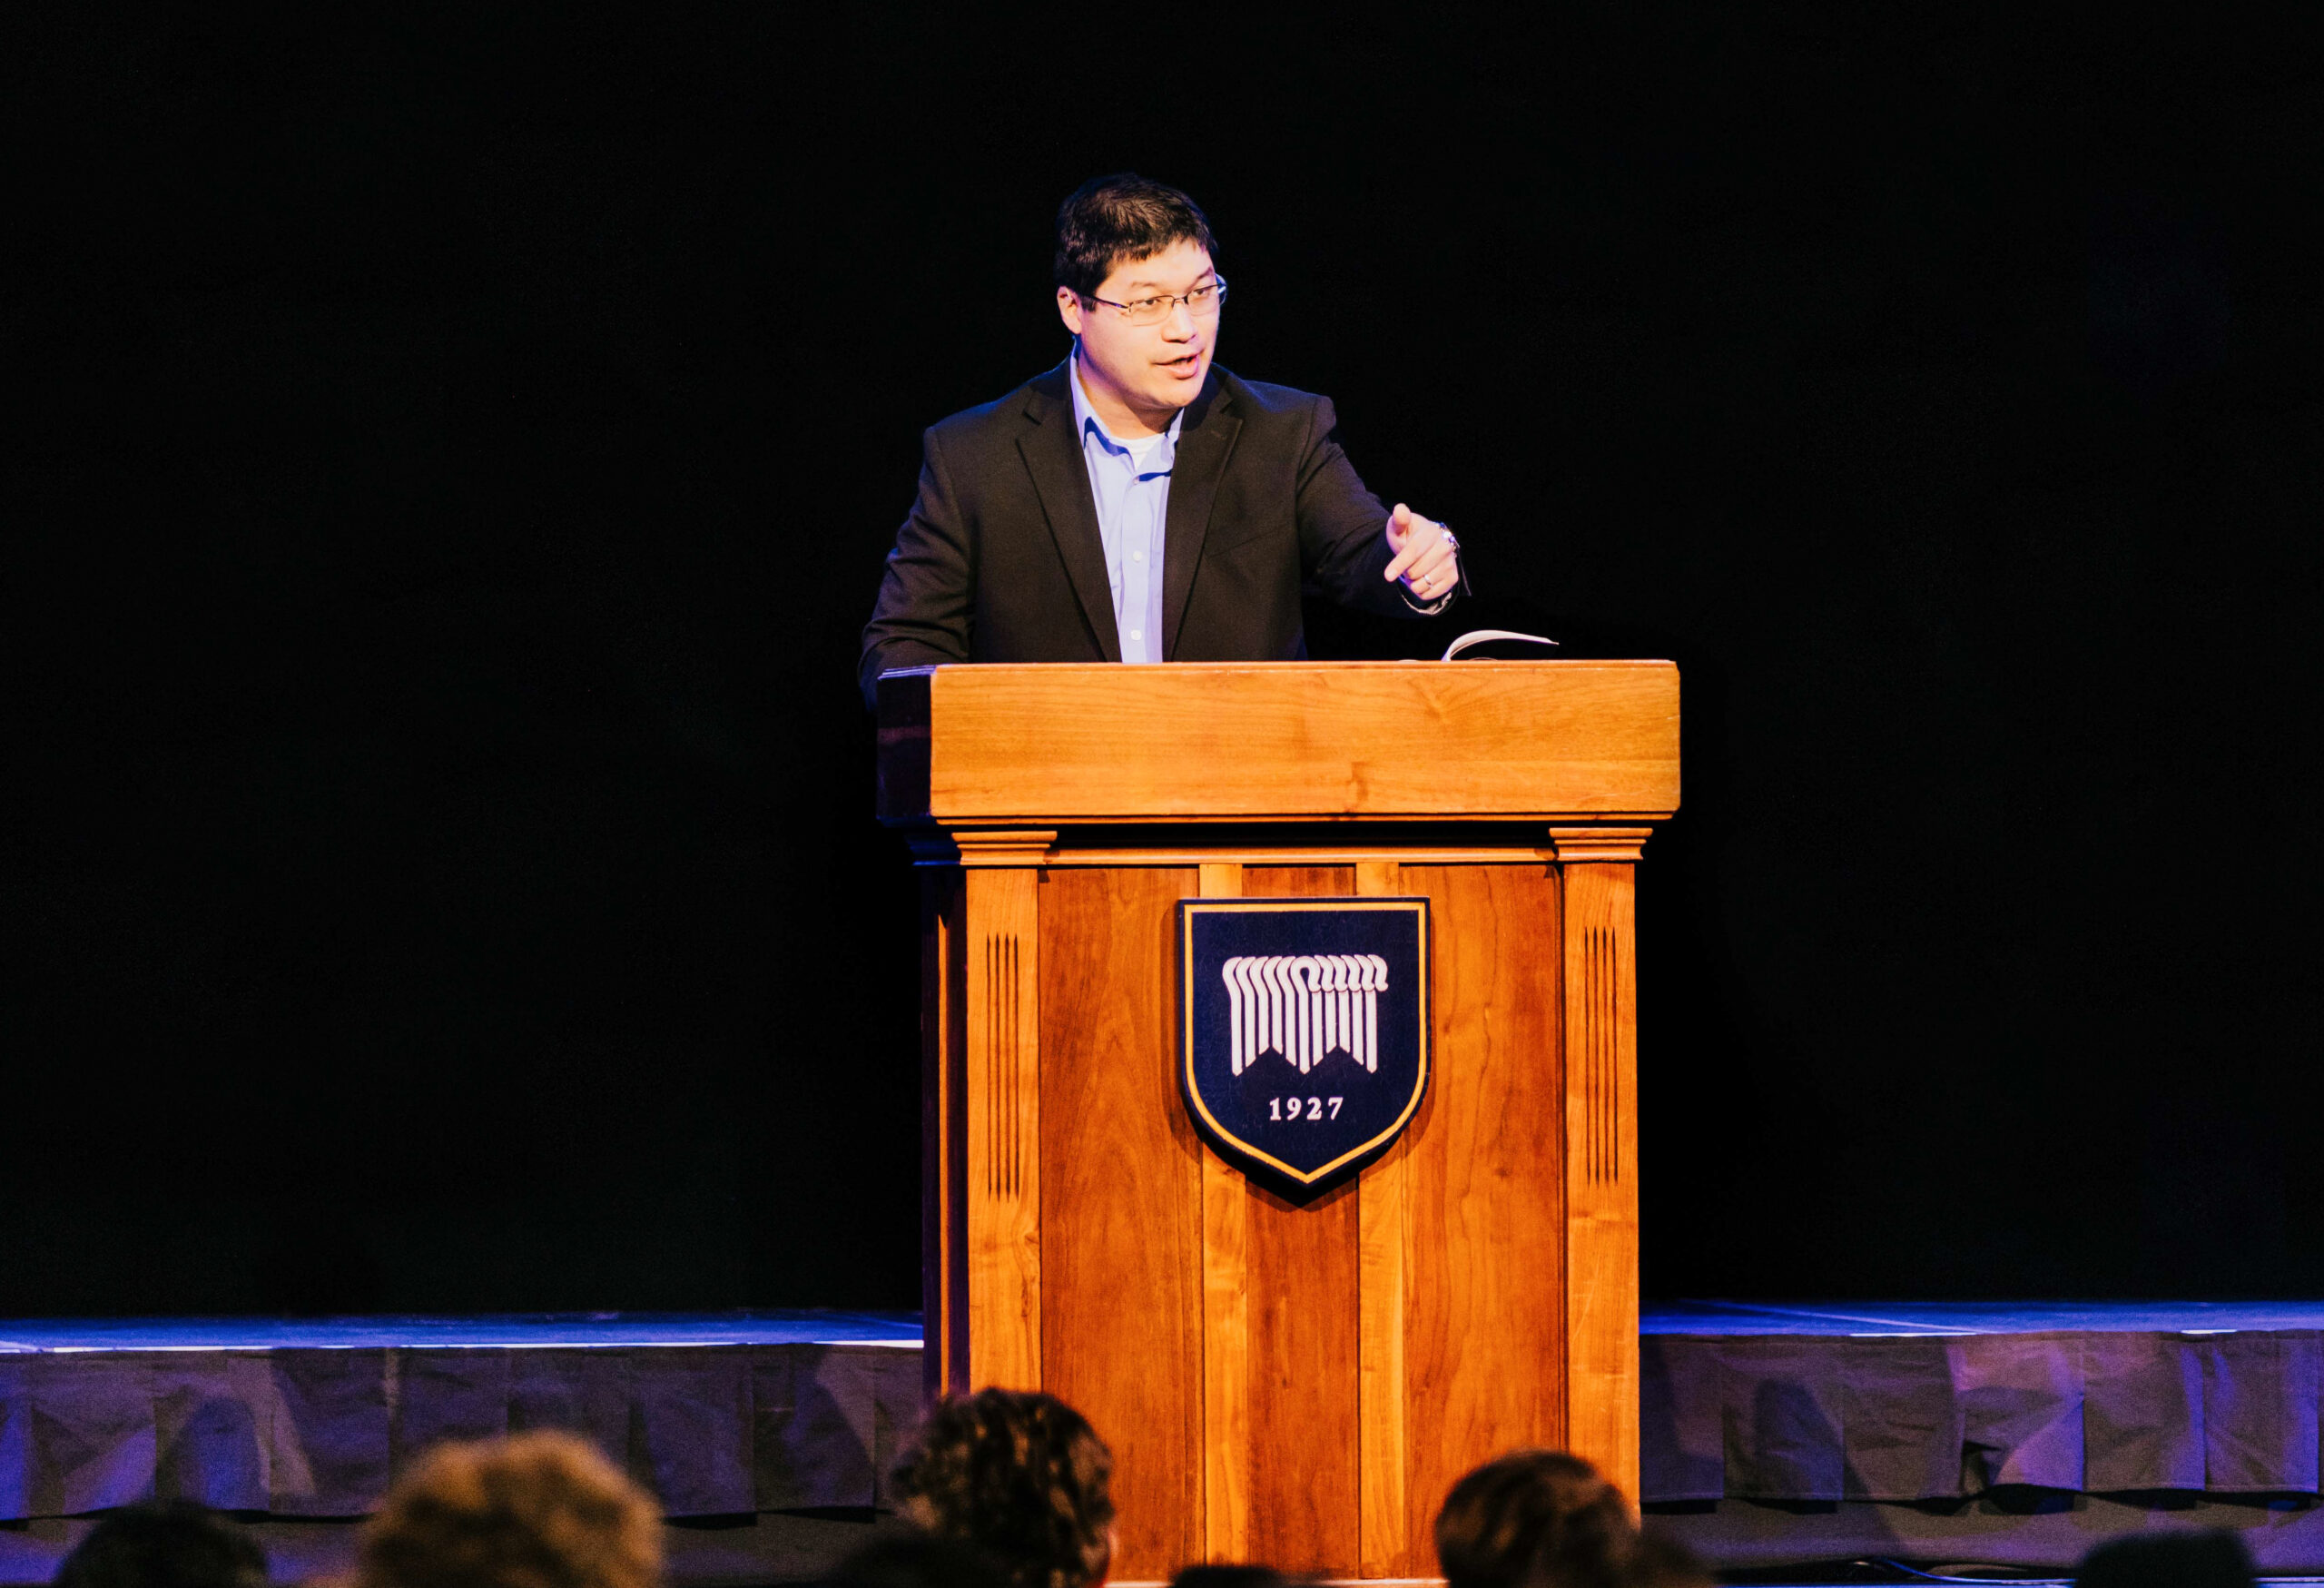 Video: Dr. Chou Highlights the Greatness of God in Job 38